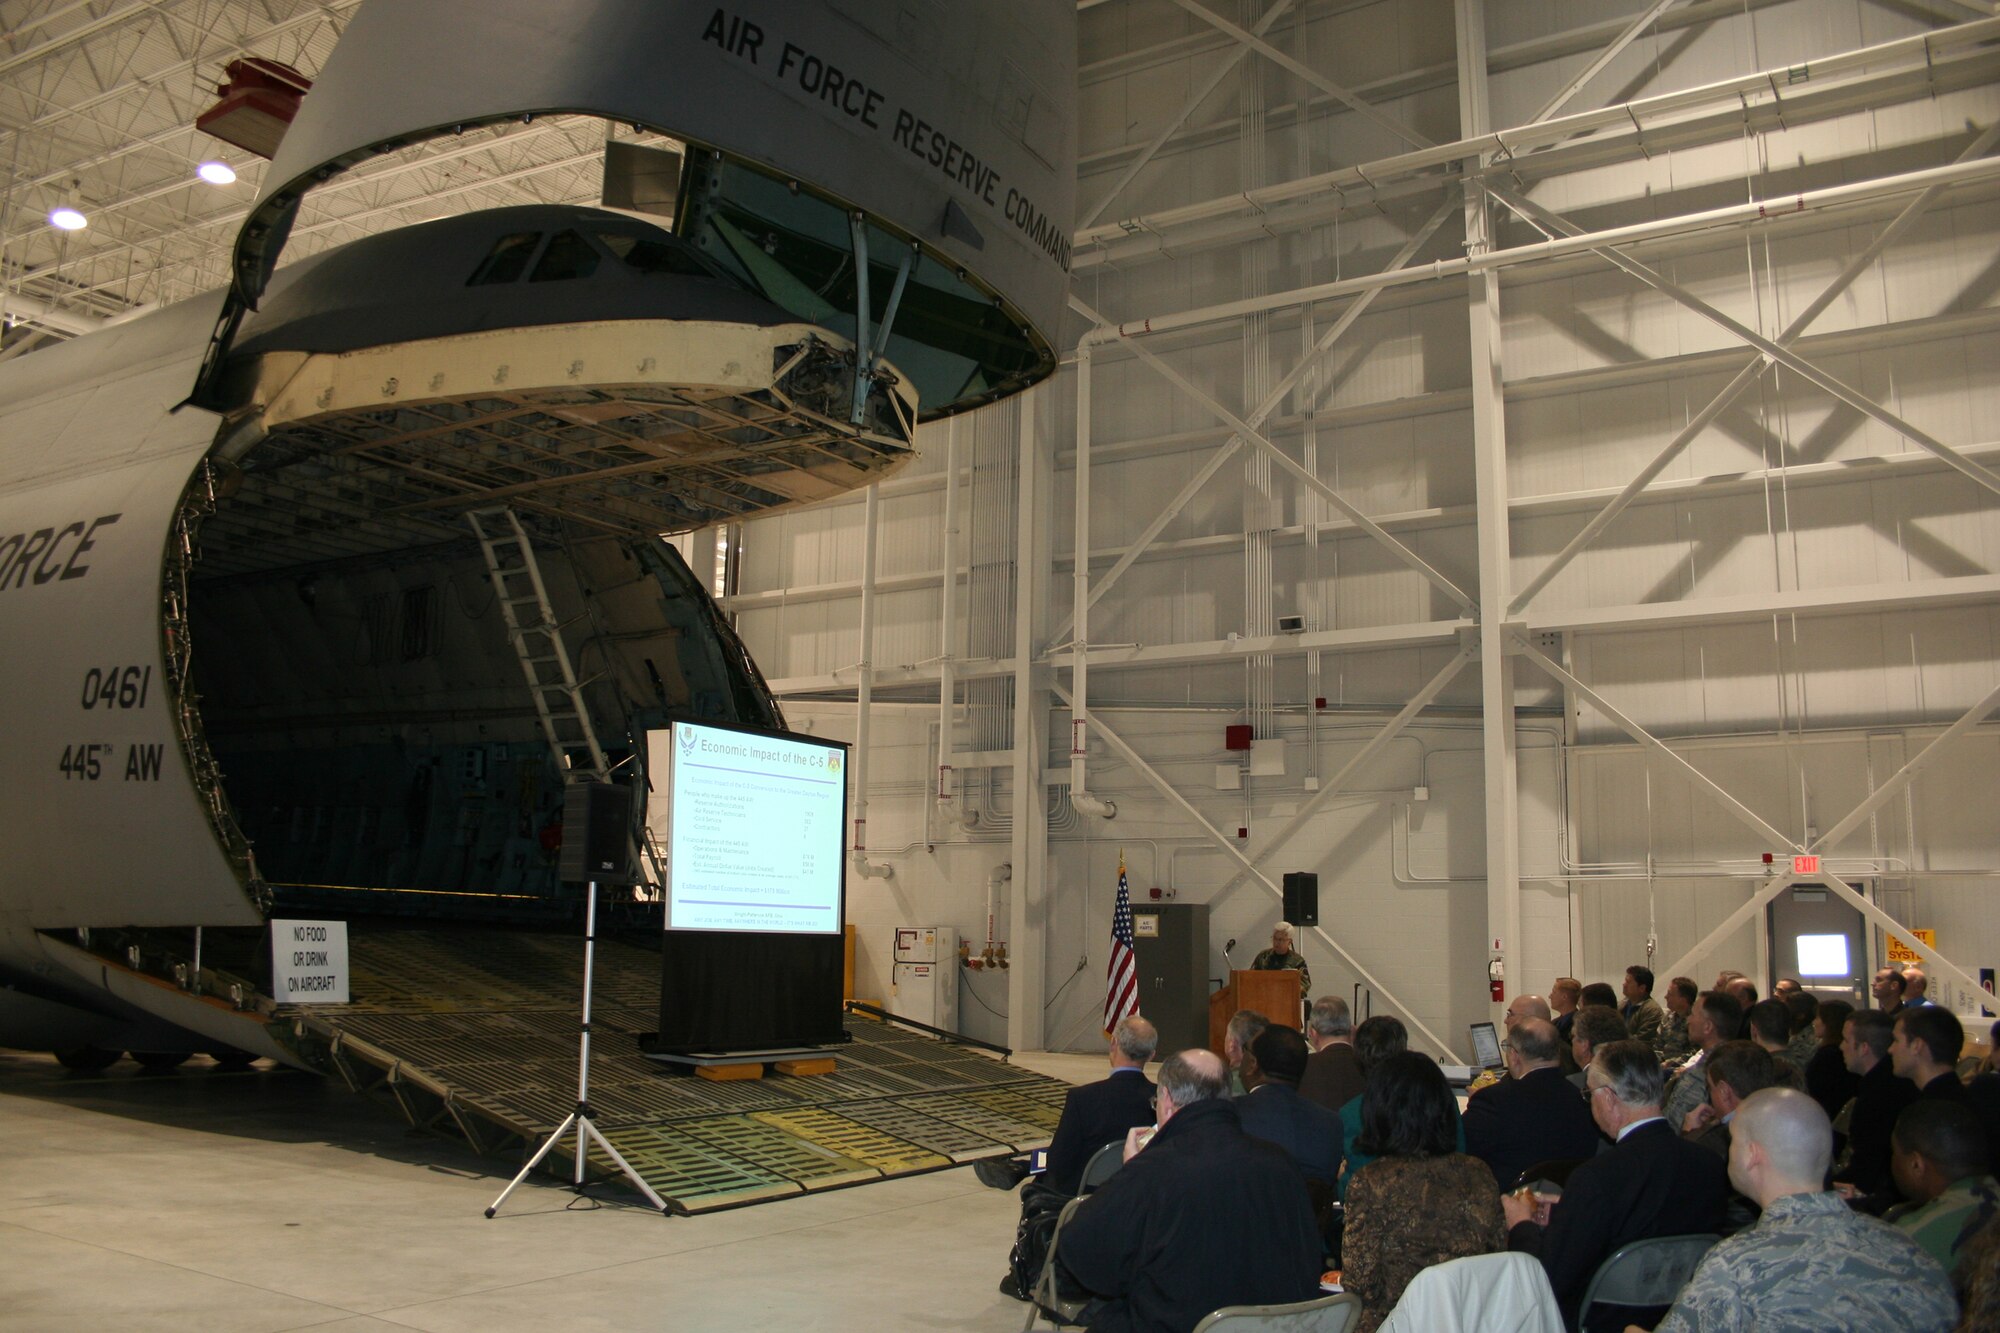 WRIGHT-PATTERSON AFB, Ohio - The 445th Maintenance Group Commander Col. Anna Schulte hosted the Logistics Officer Association meeting inside the new C-5 Fuel System Maintenance Hangar March, 14, 2008.  The open C-5 provided a crowd pleasing backdrop for the meeting.  The meeting's slideshow was projected inside the aircraft.  Aircrew was available to answer questions before the meeting began. (U.S. Air Force photo/Mary Allen)